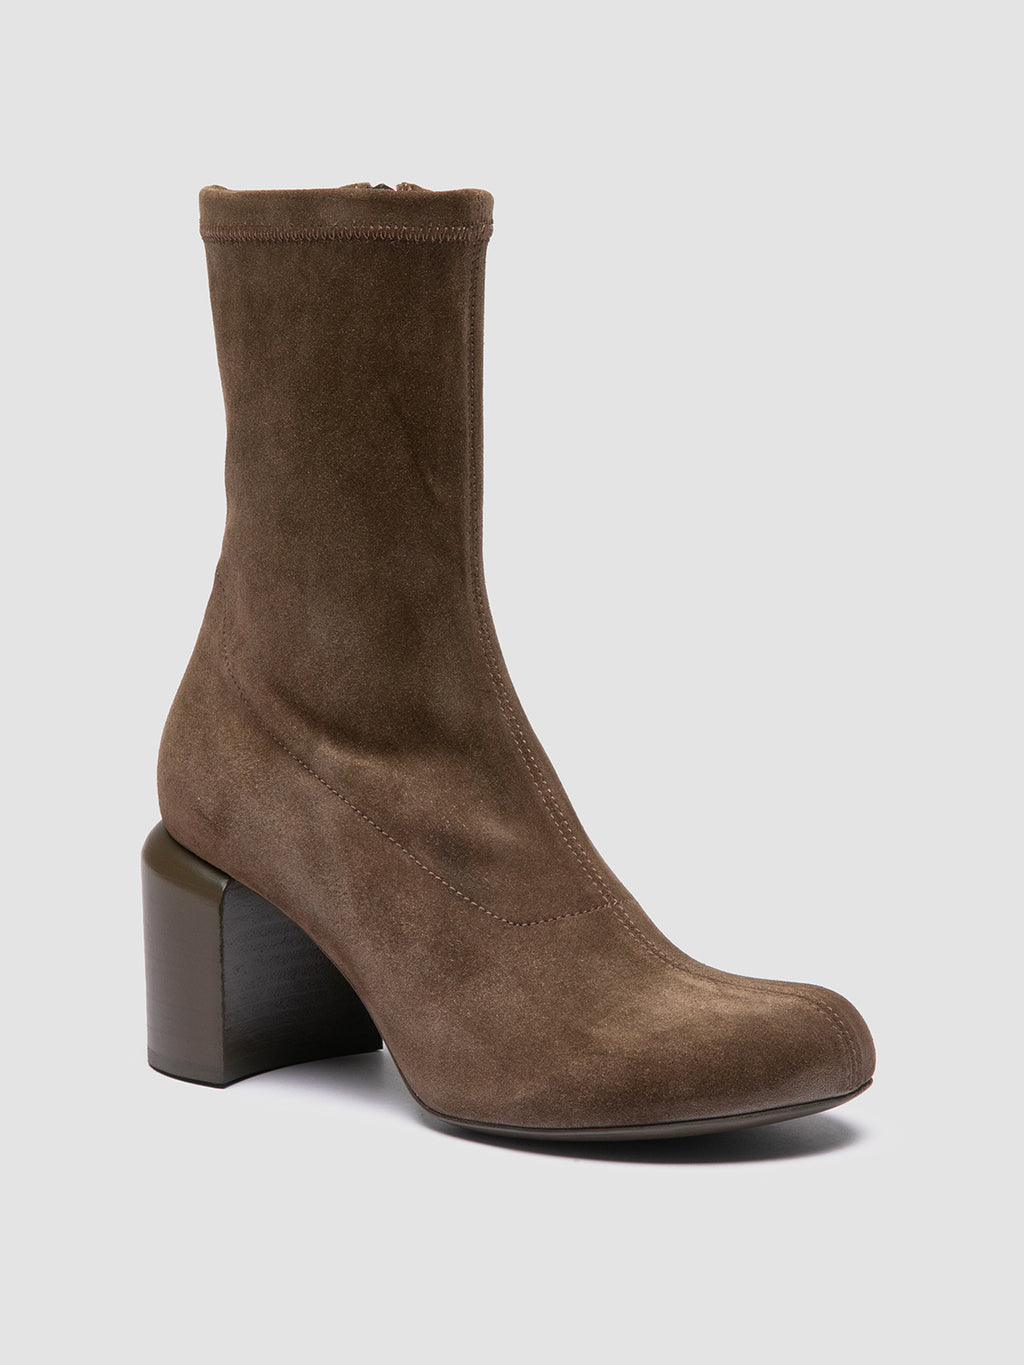 ELINOR 005 - Taupe Suede Zipped Boots